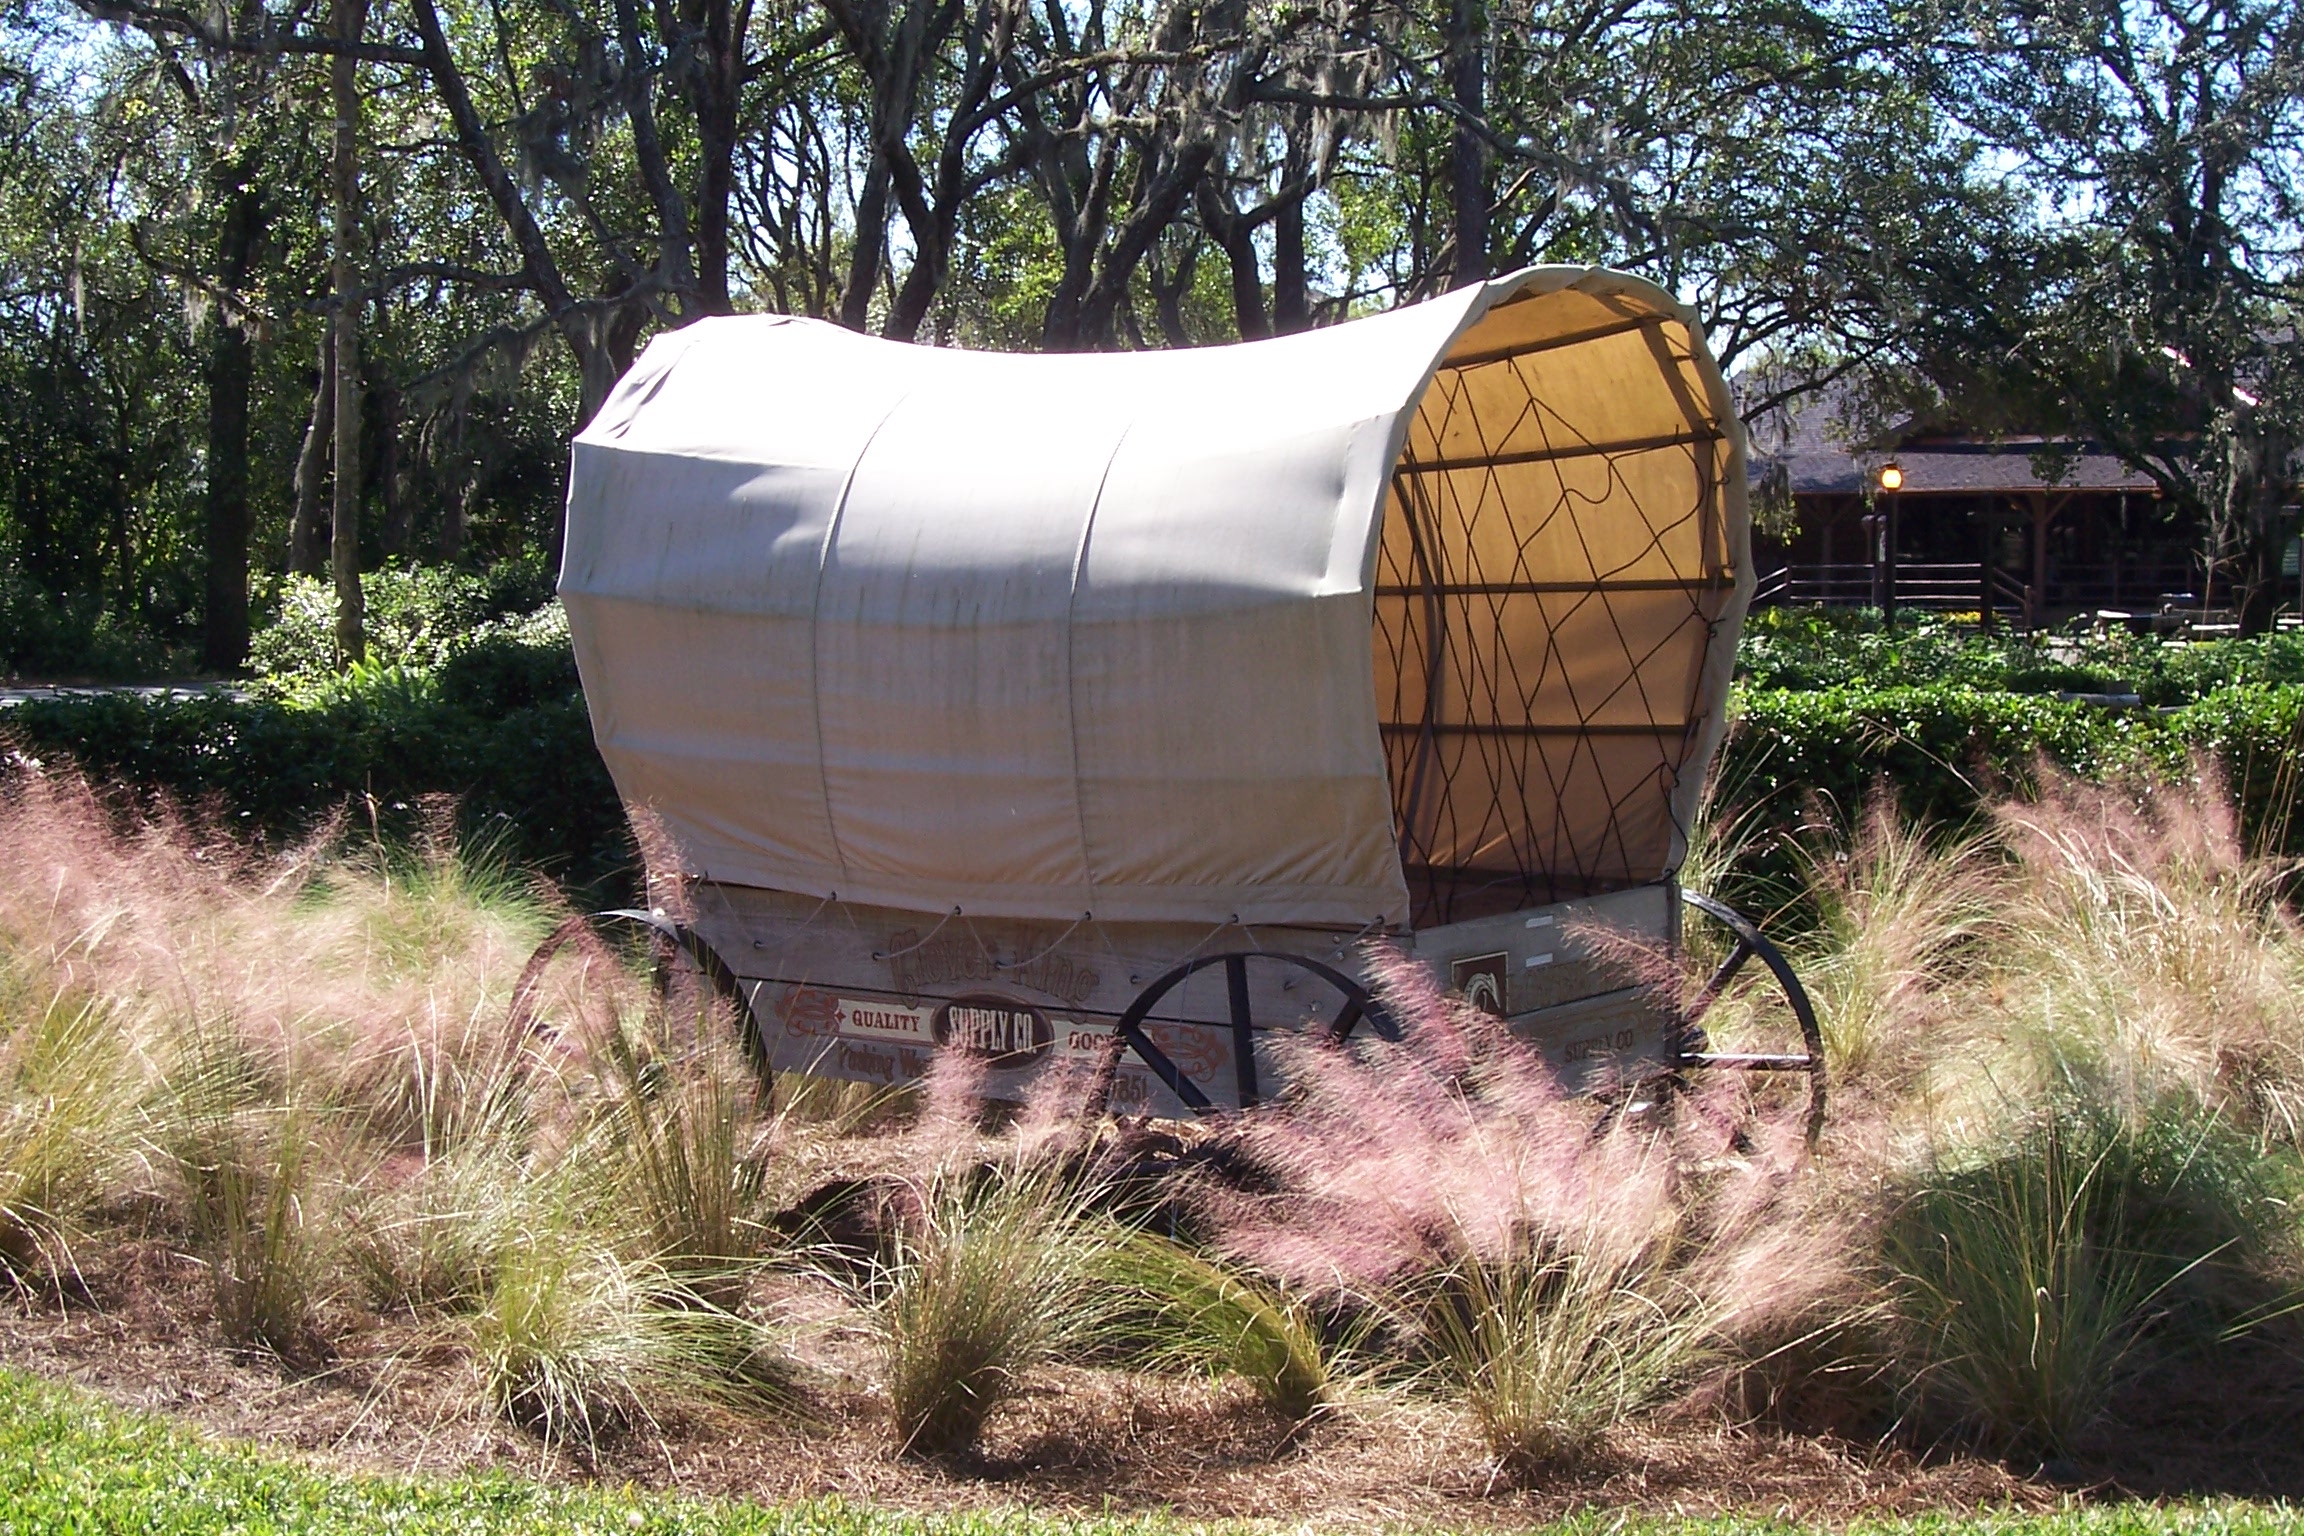 Covered wagon at the Trading Post.